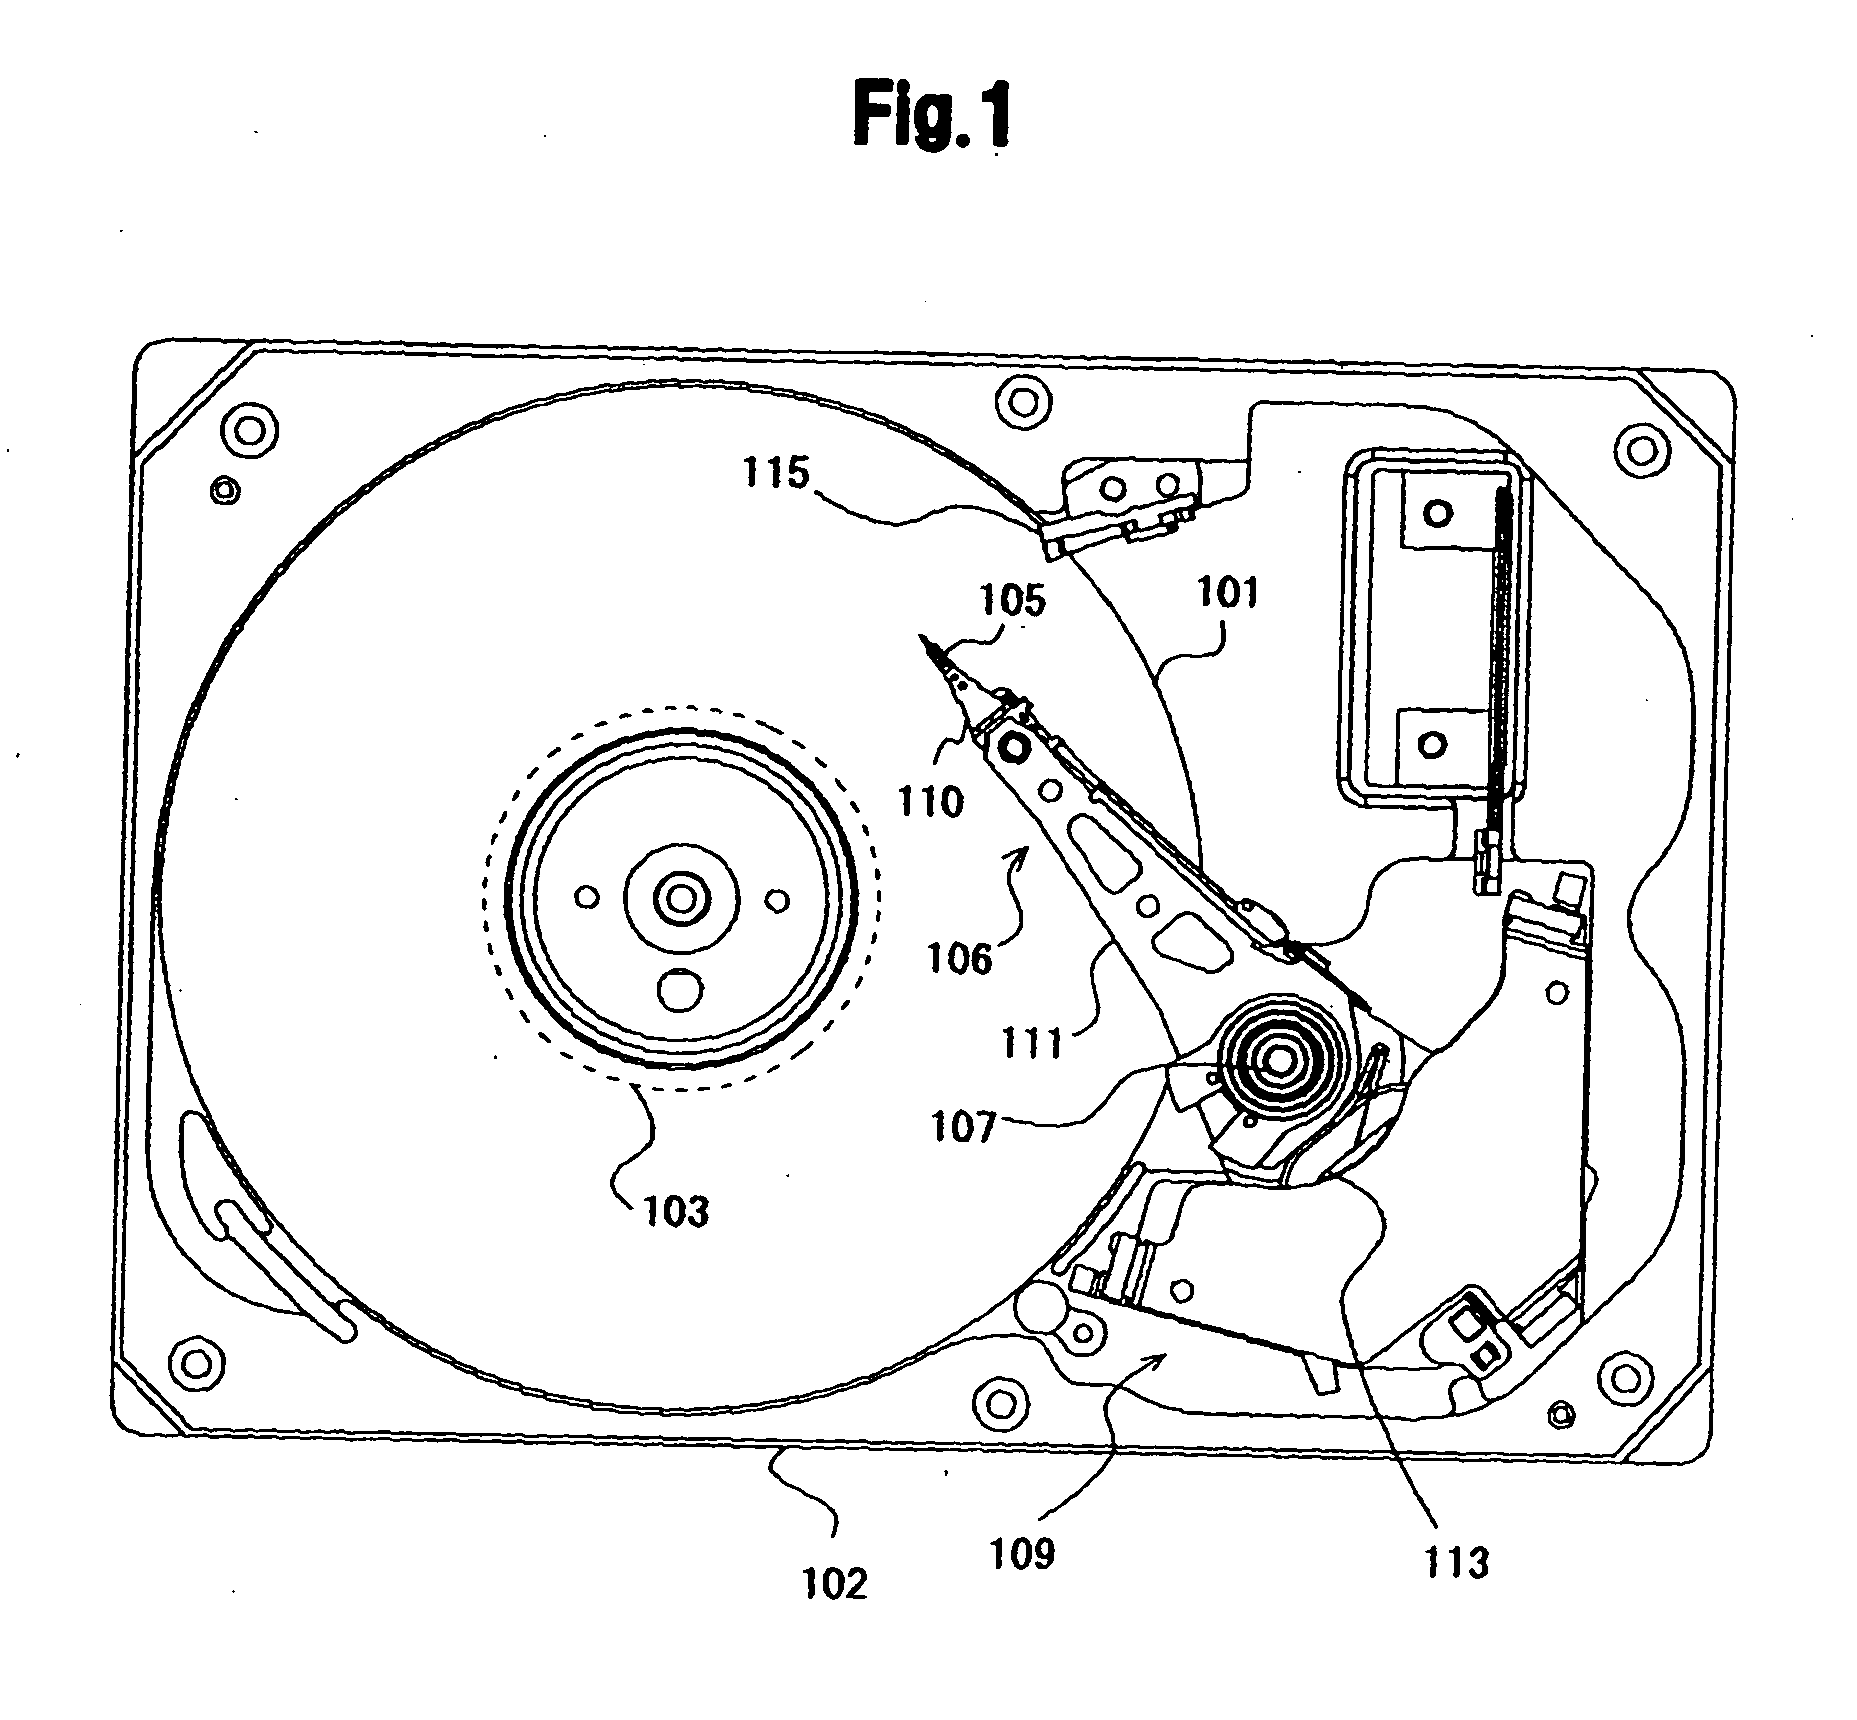 Microactuator,head gimbal assembly, and magnetic disk drive